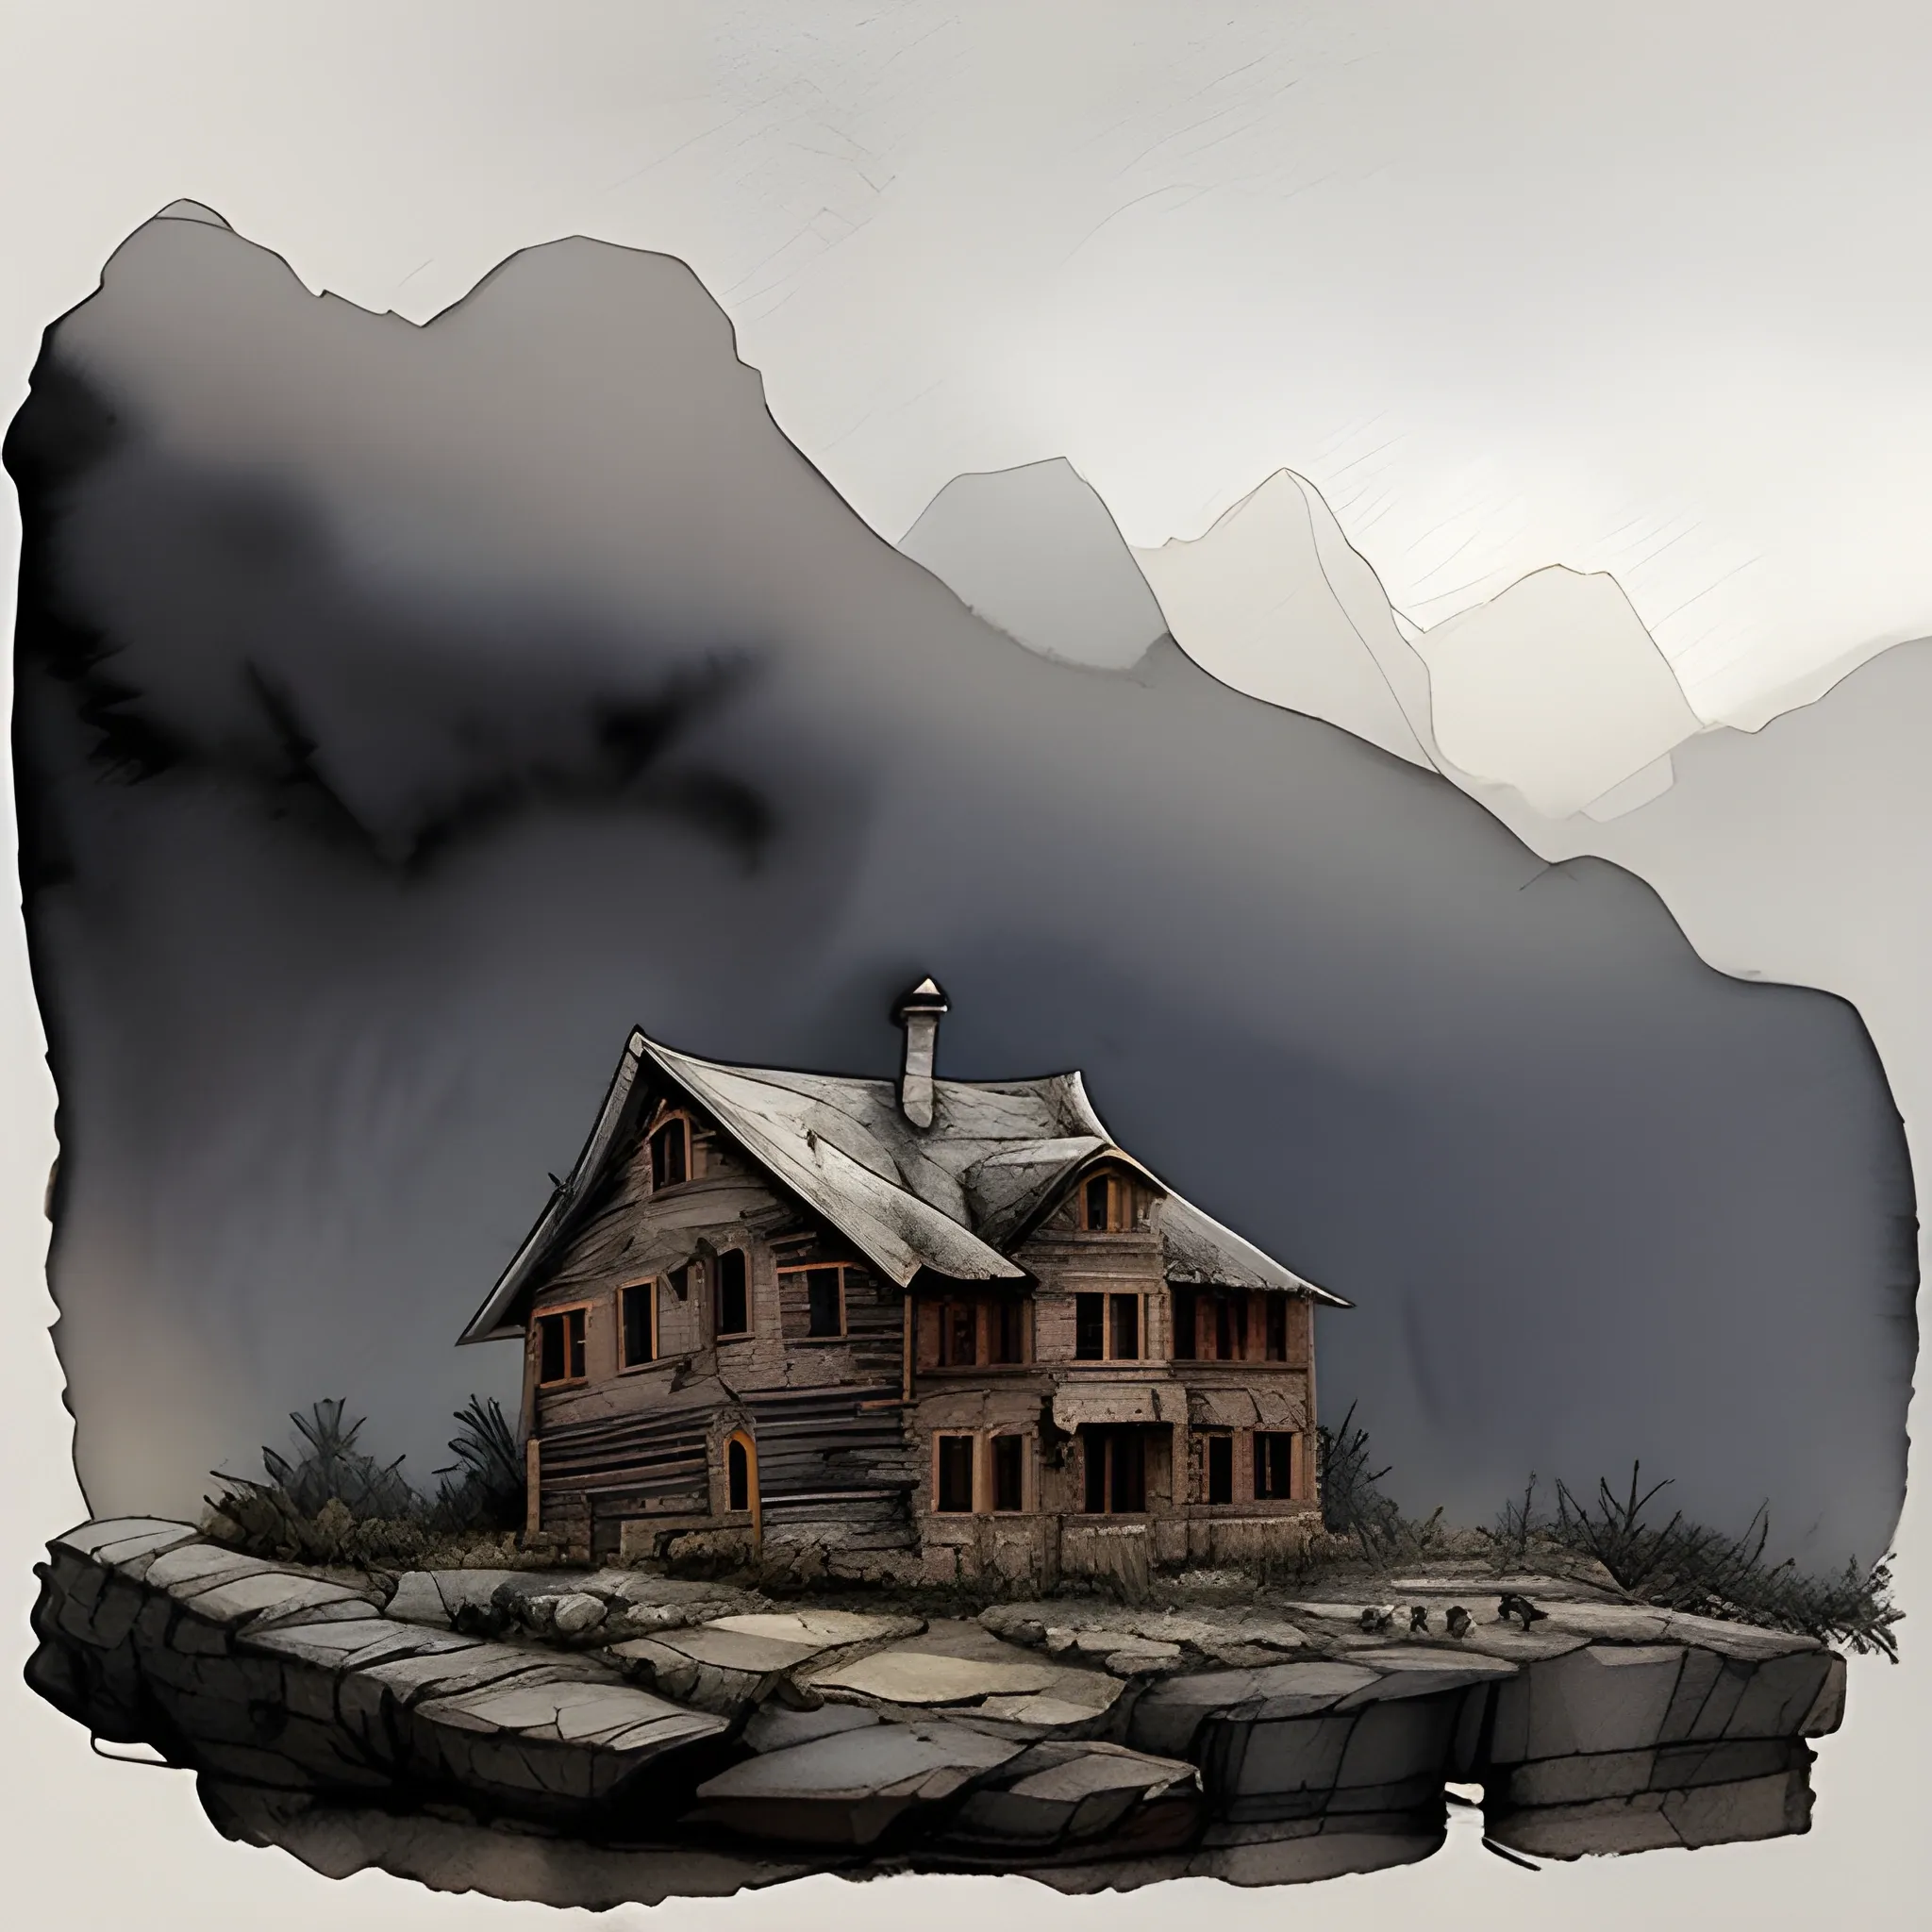 imagine a burnt wooden house in a rocky landscape, painted using watercolour and ink, sombre palette, fine pen lines, the mood is haunting, the lighting is atmospheric volumetric, artistic composition